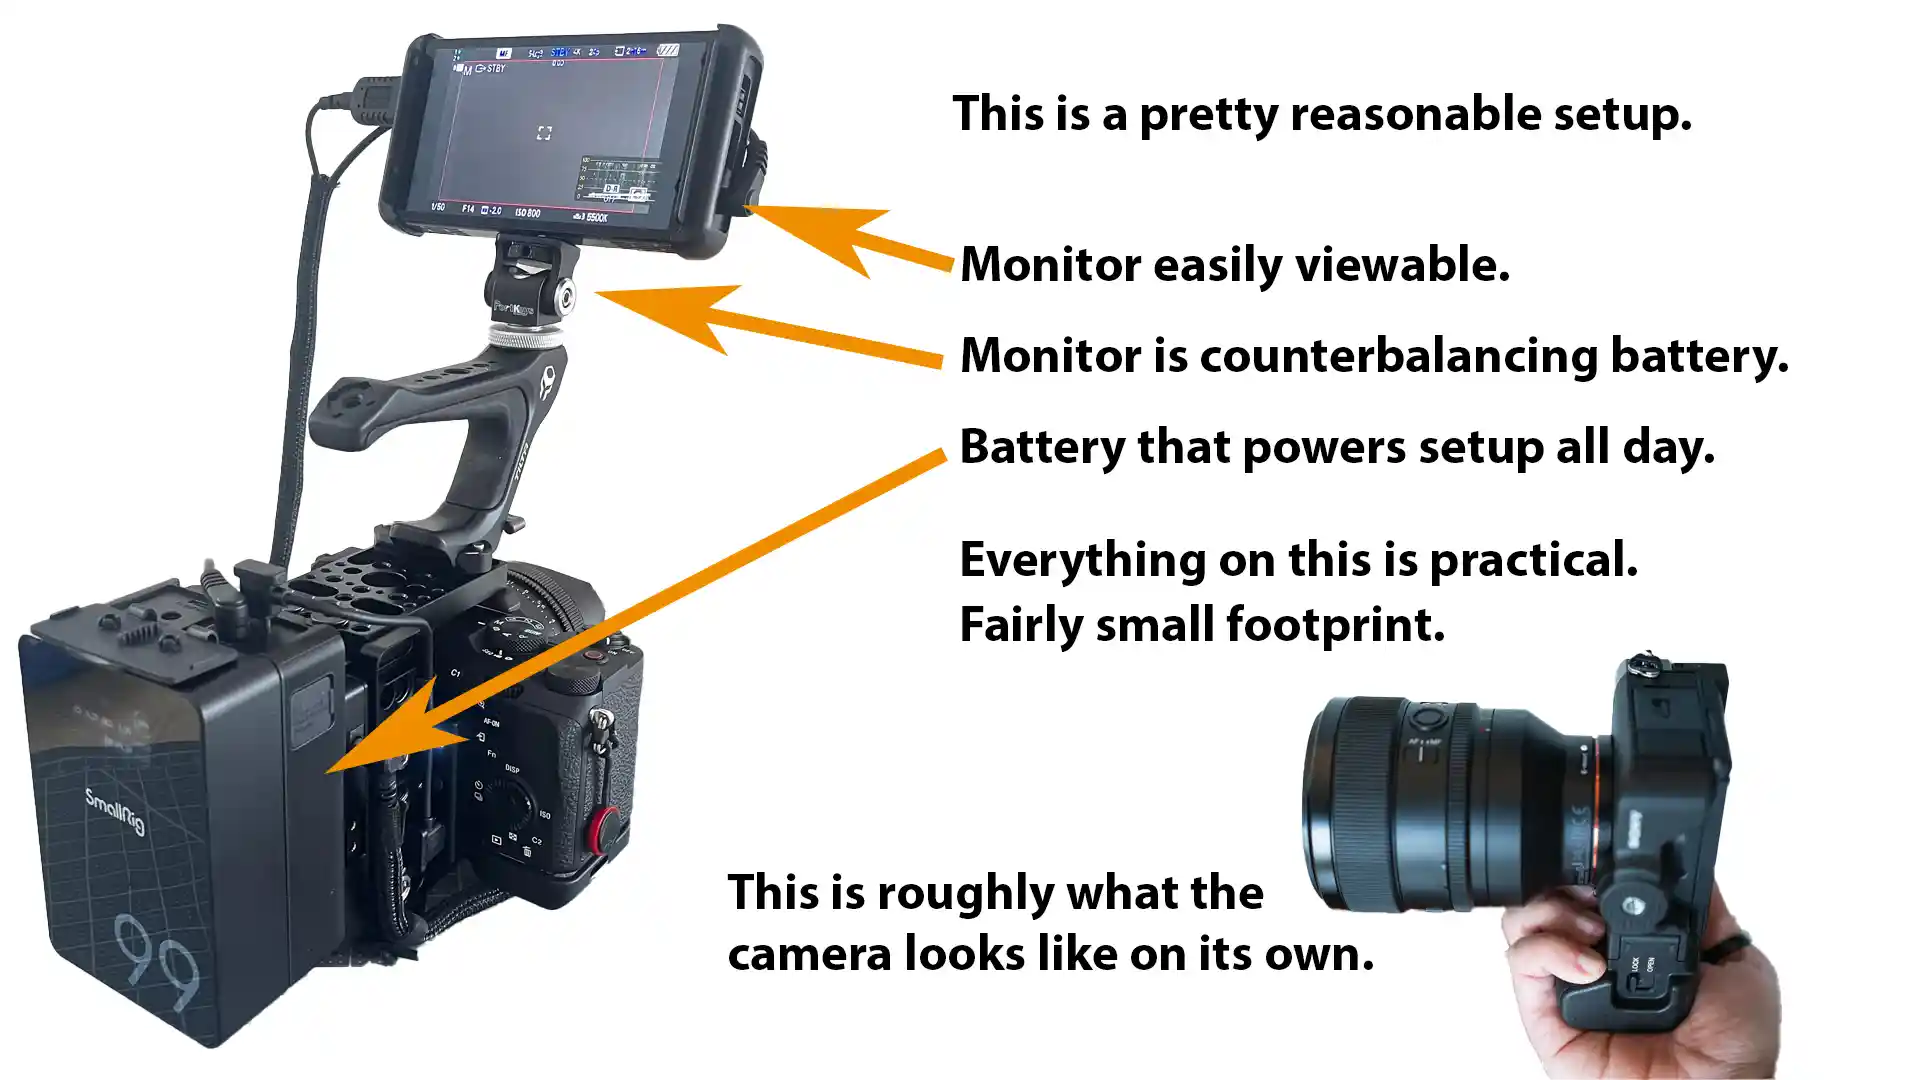 Sony Camera With Practical Accessories